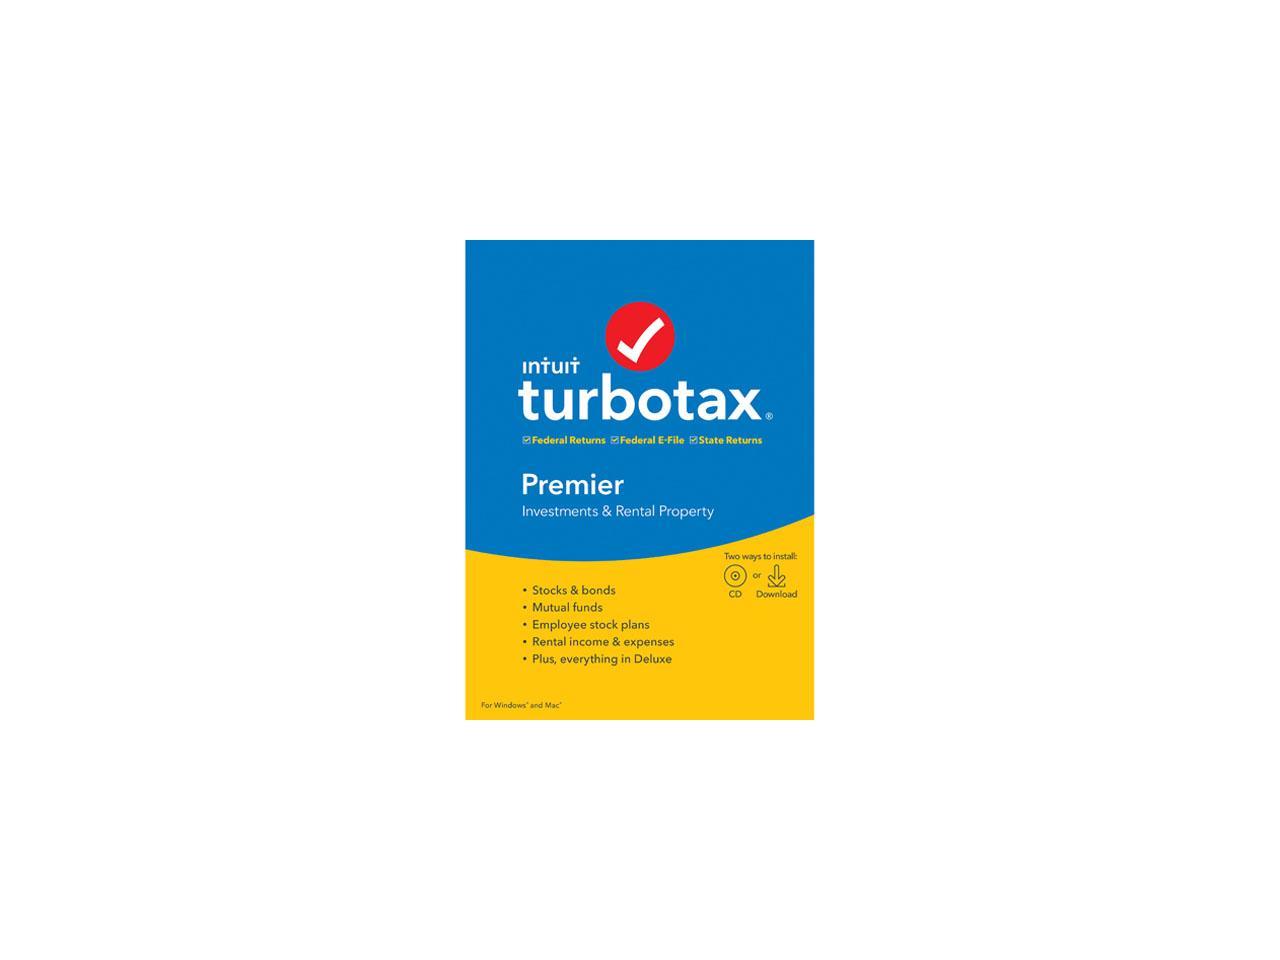 turbotax products